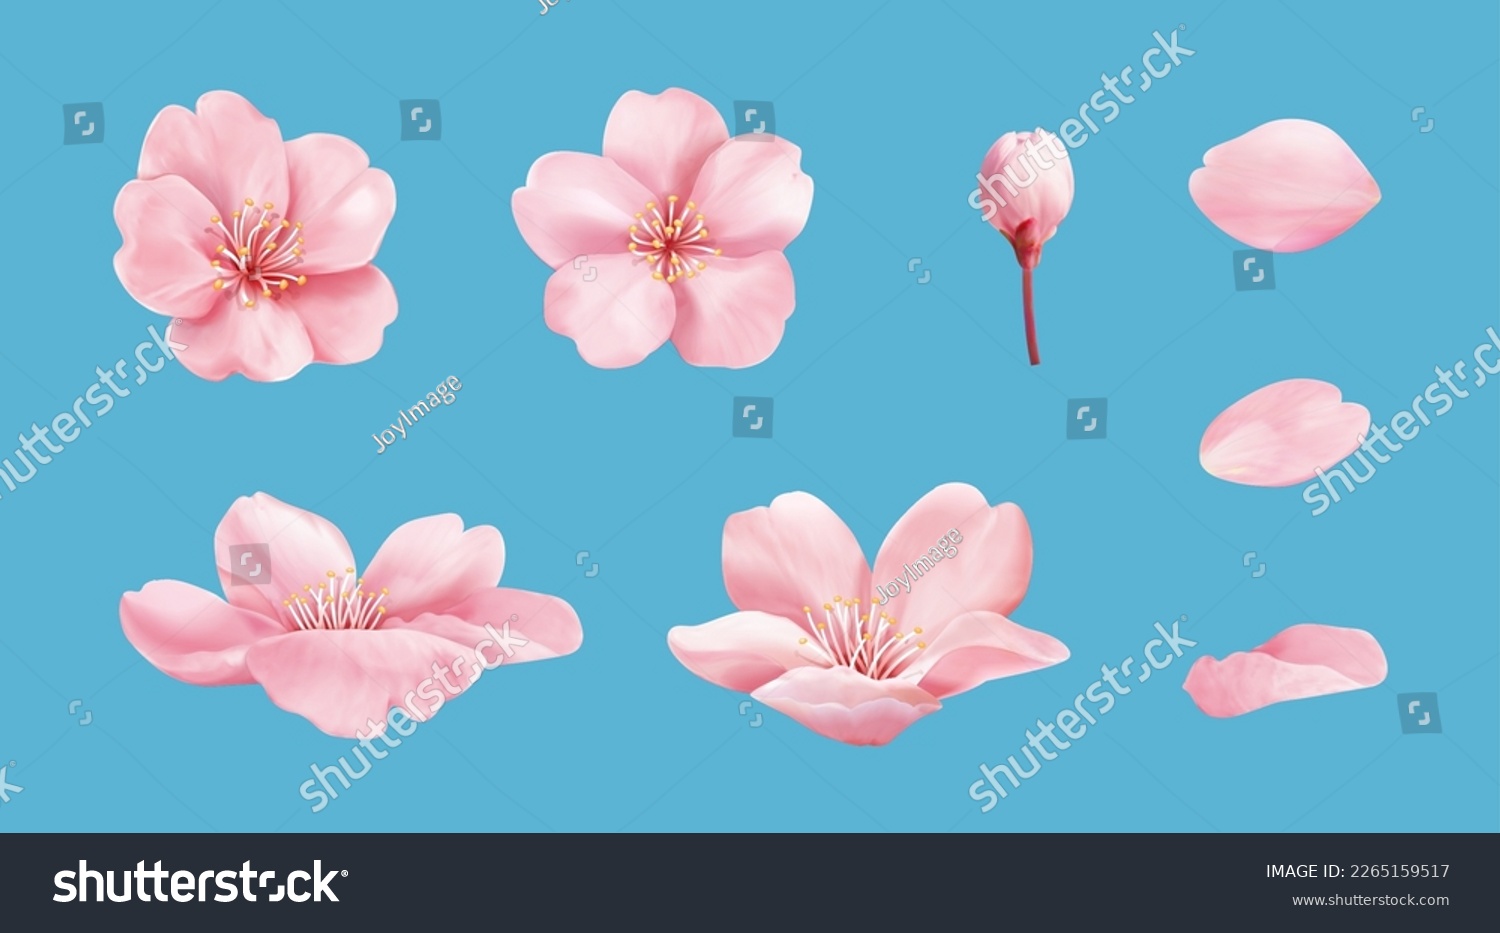 Pink cherry blossom element set isolated on light blue background. Including flower blossoms, petals, and bud. #2265159517